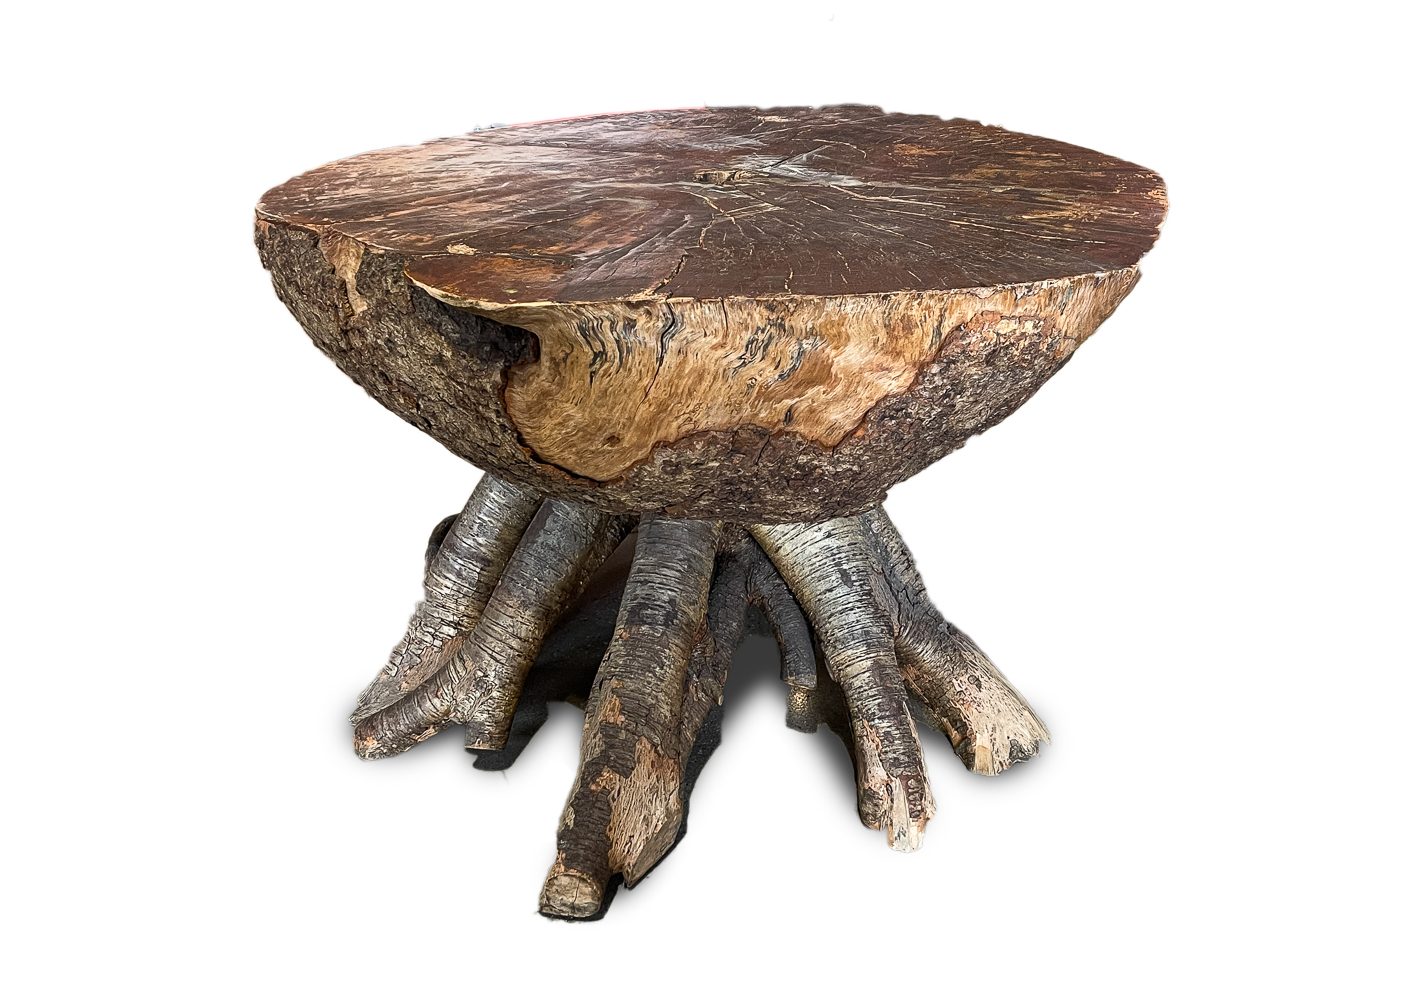 BURL AND ROOT TABLE FROM GREAT